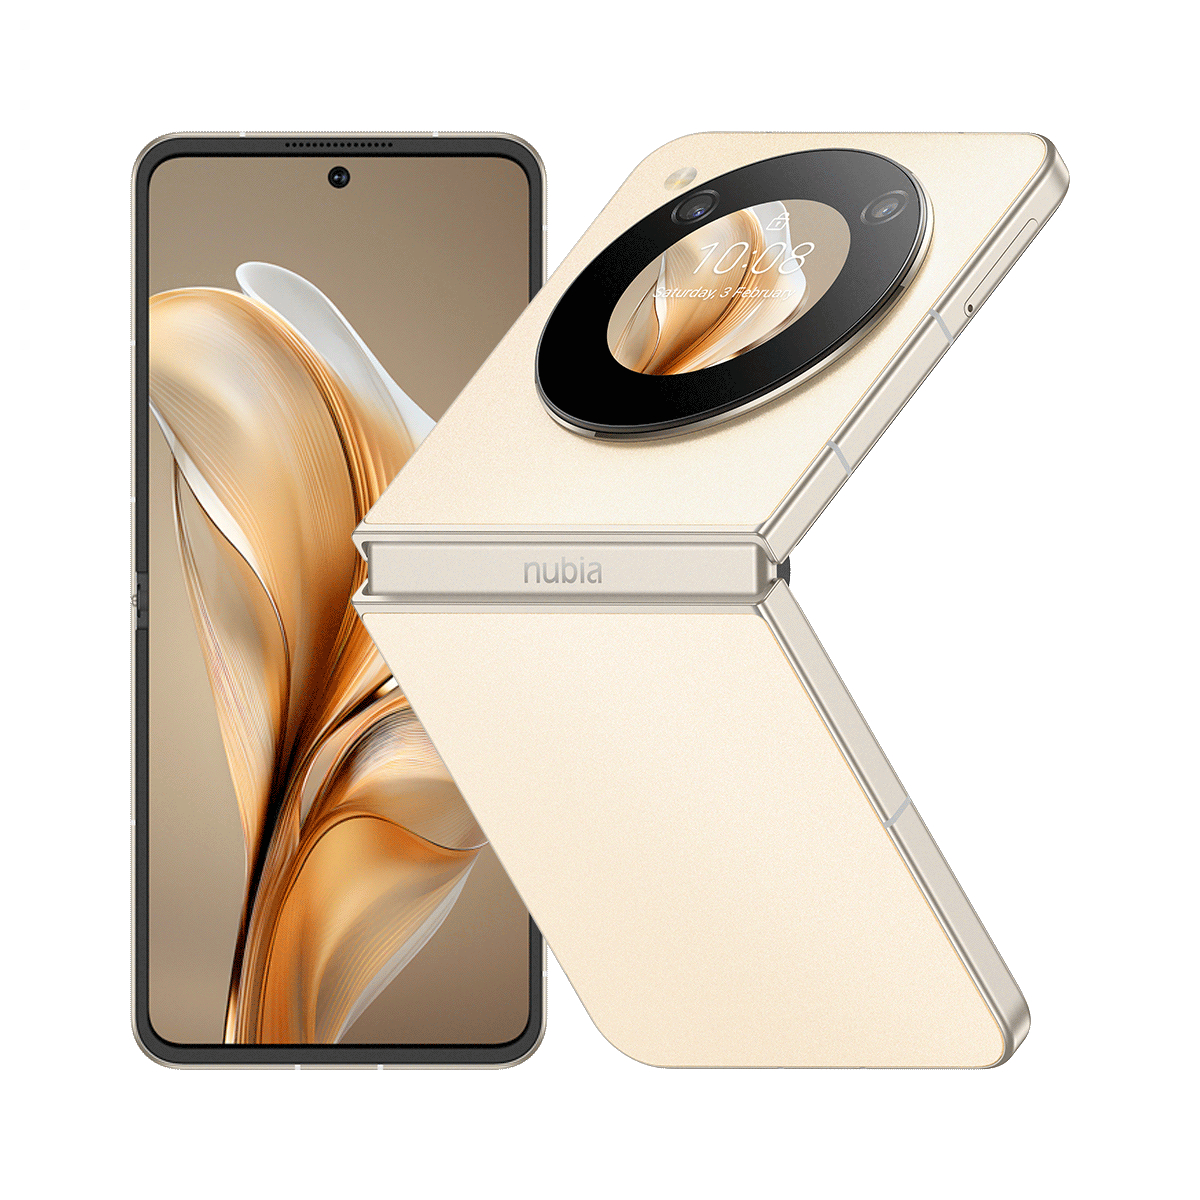 A render of the front and back of the Nubia Flip 5G